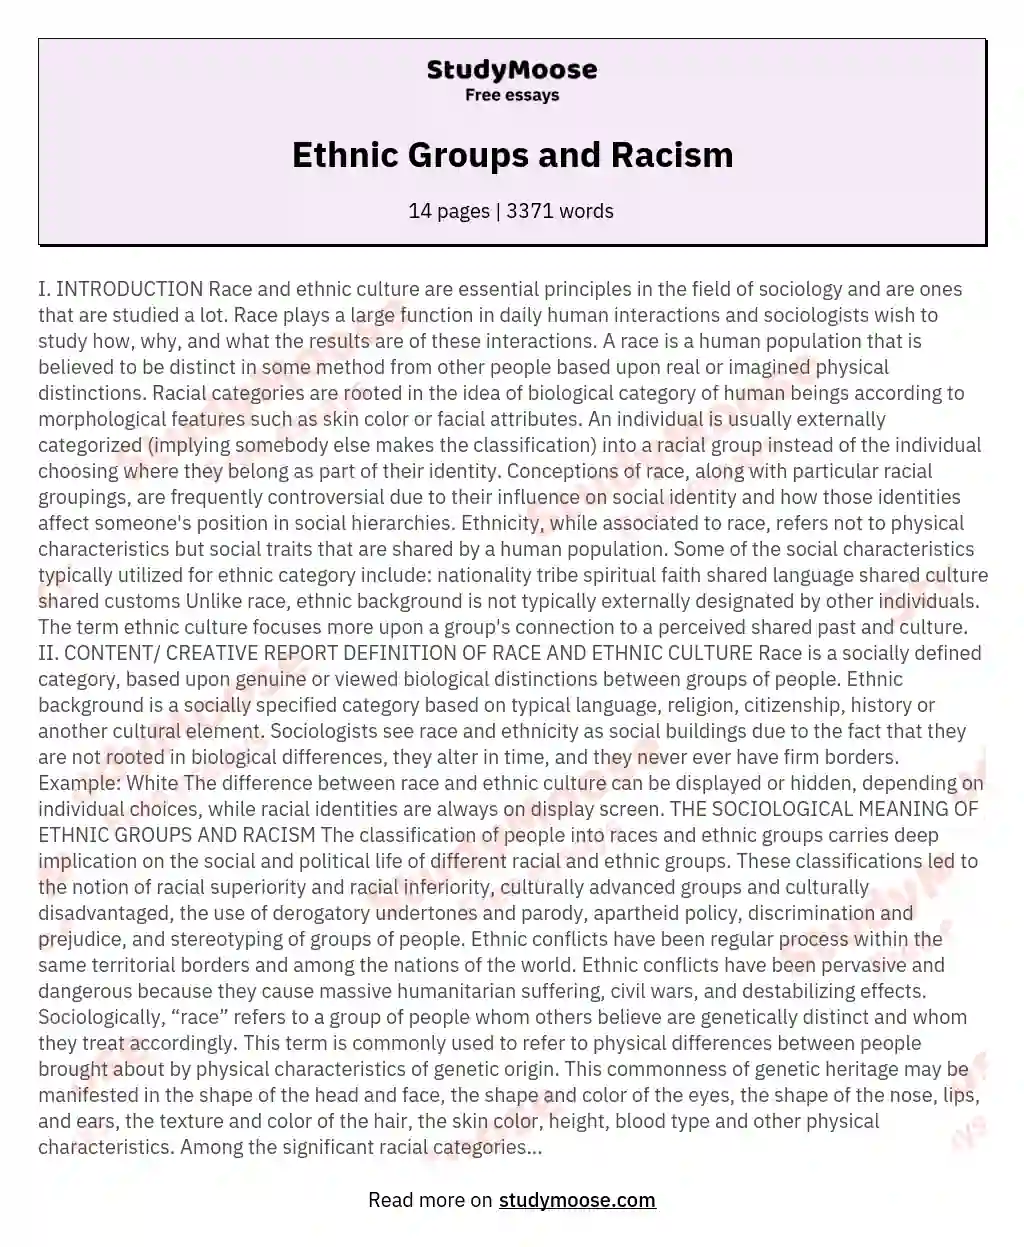 Ethnic Groups and Racism